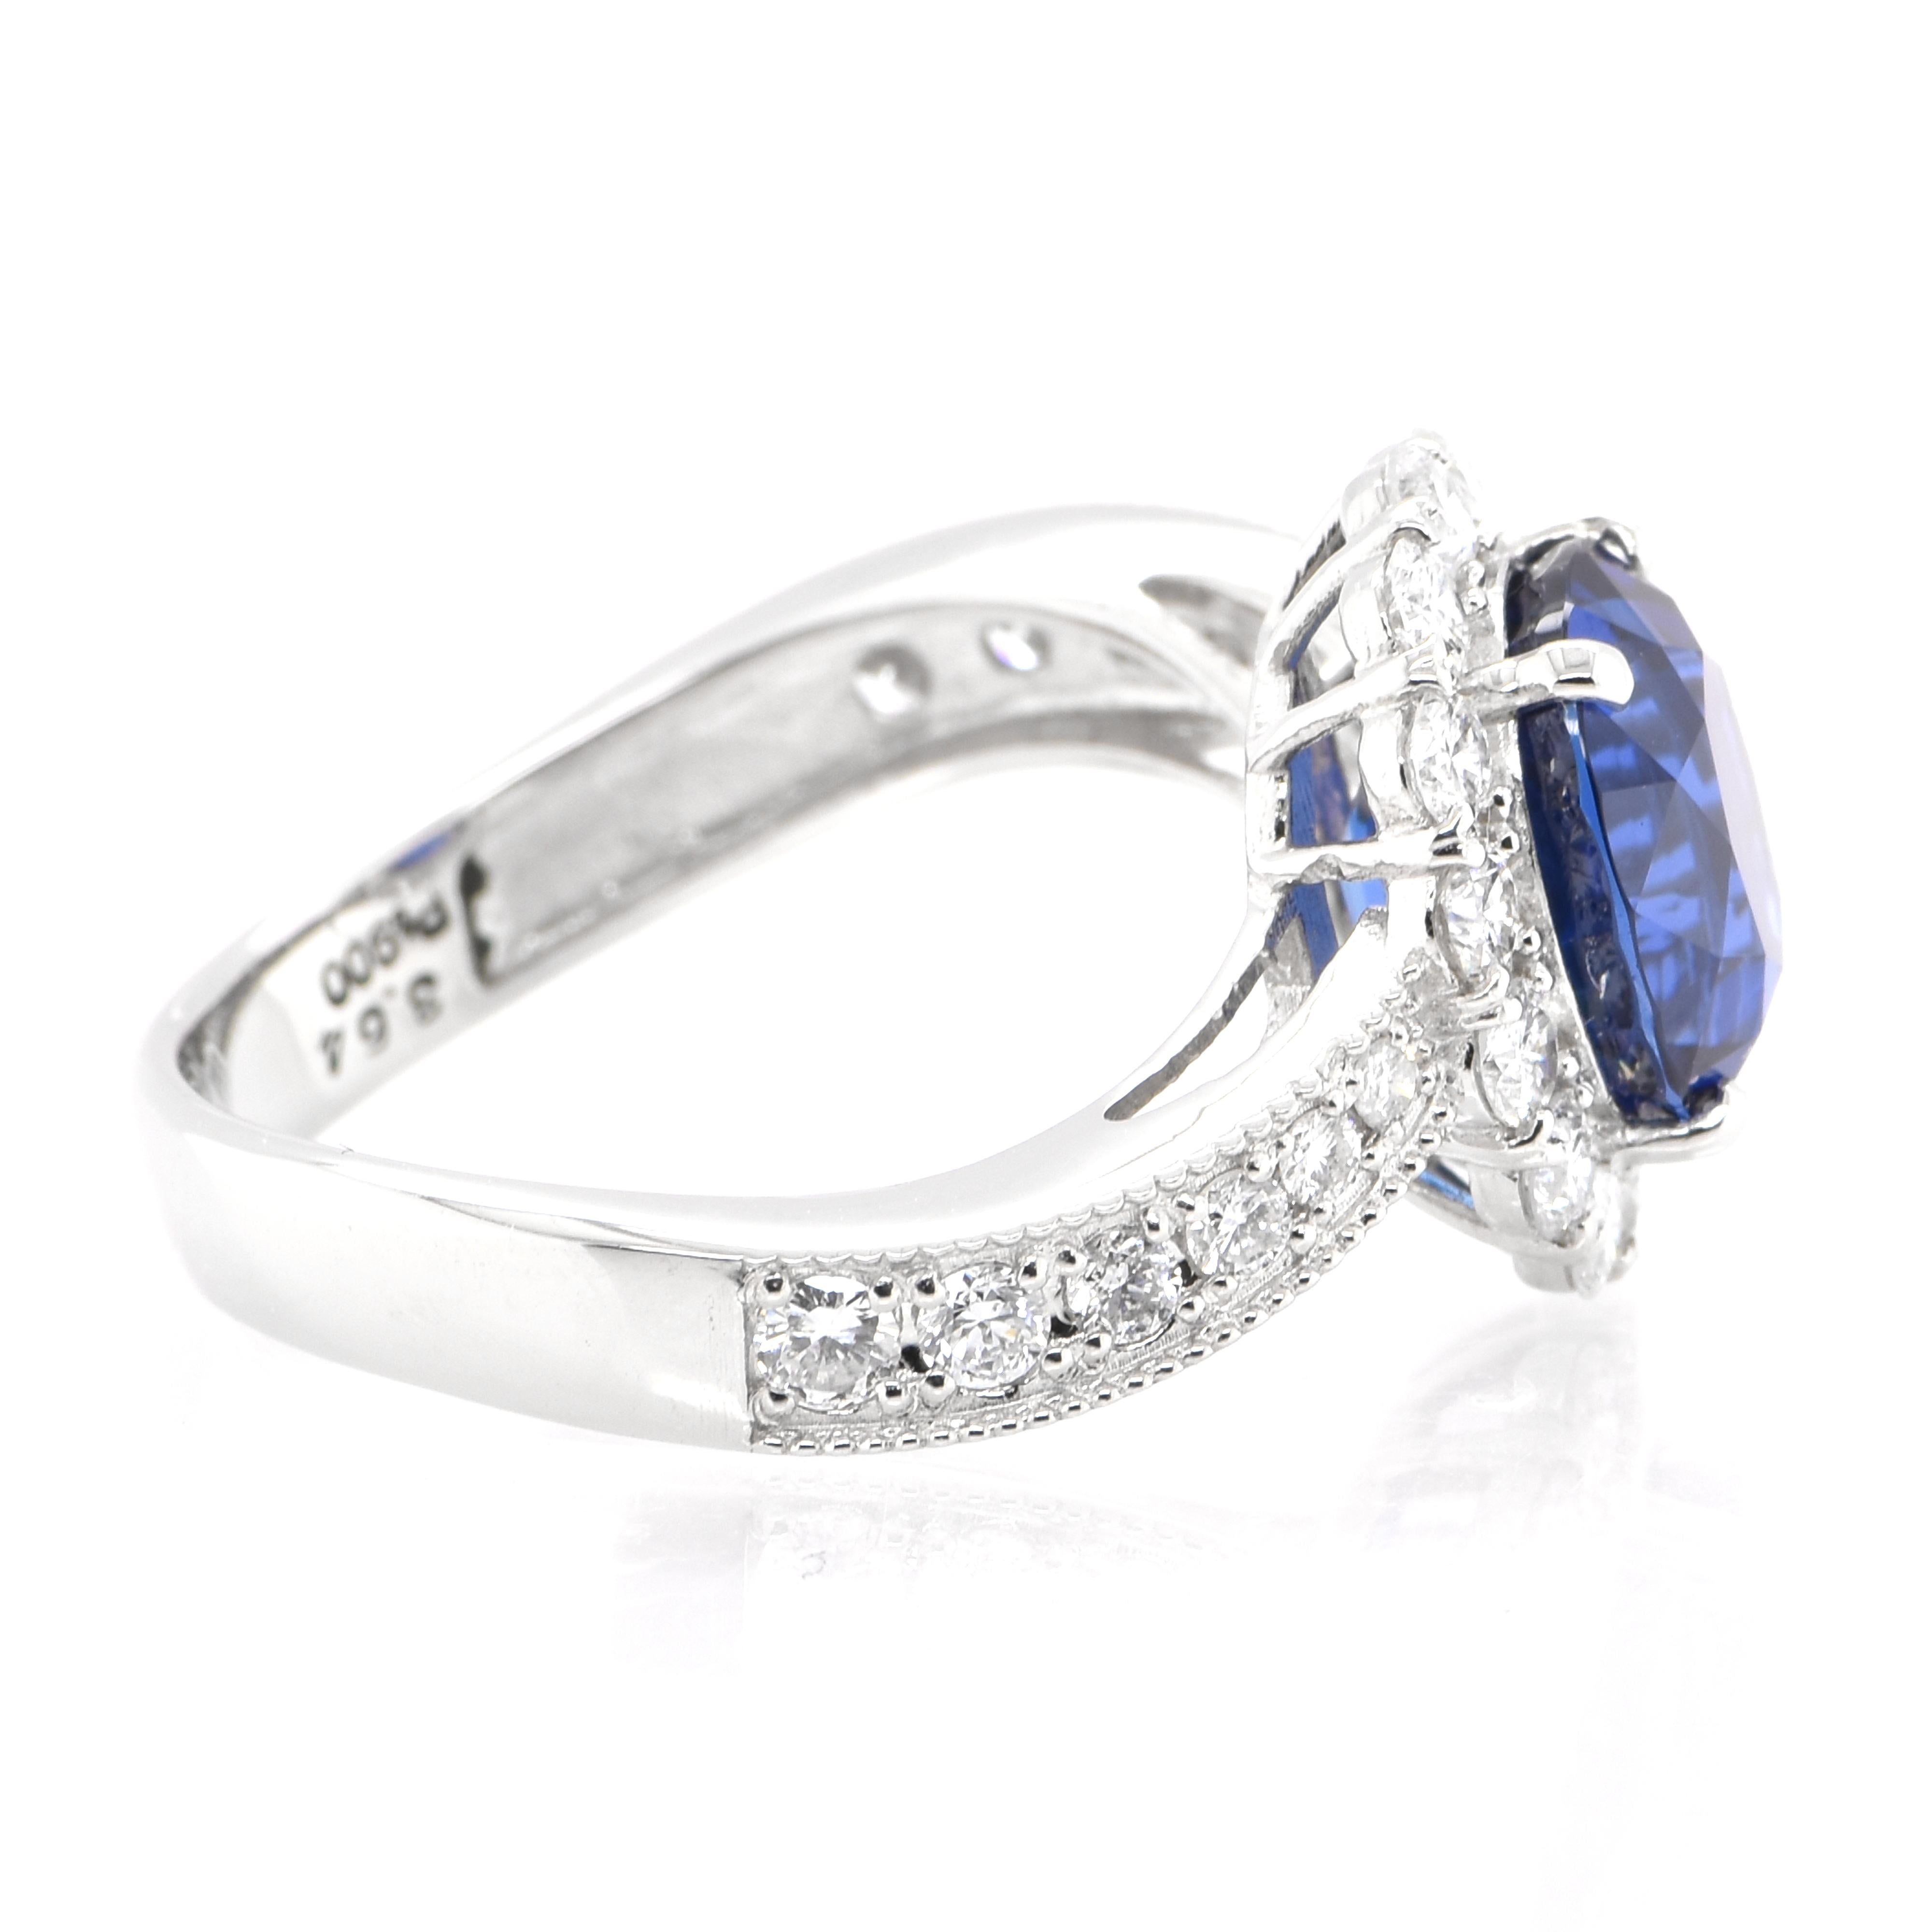 Oval Cut Gia Certified 3.64 Carat Natural Royal Blue Ceylon Sapphire Ring Set in Platinum